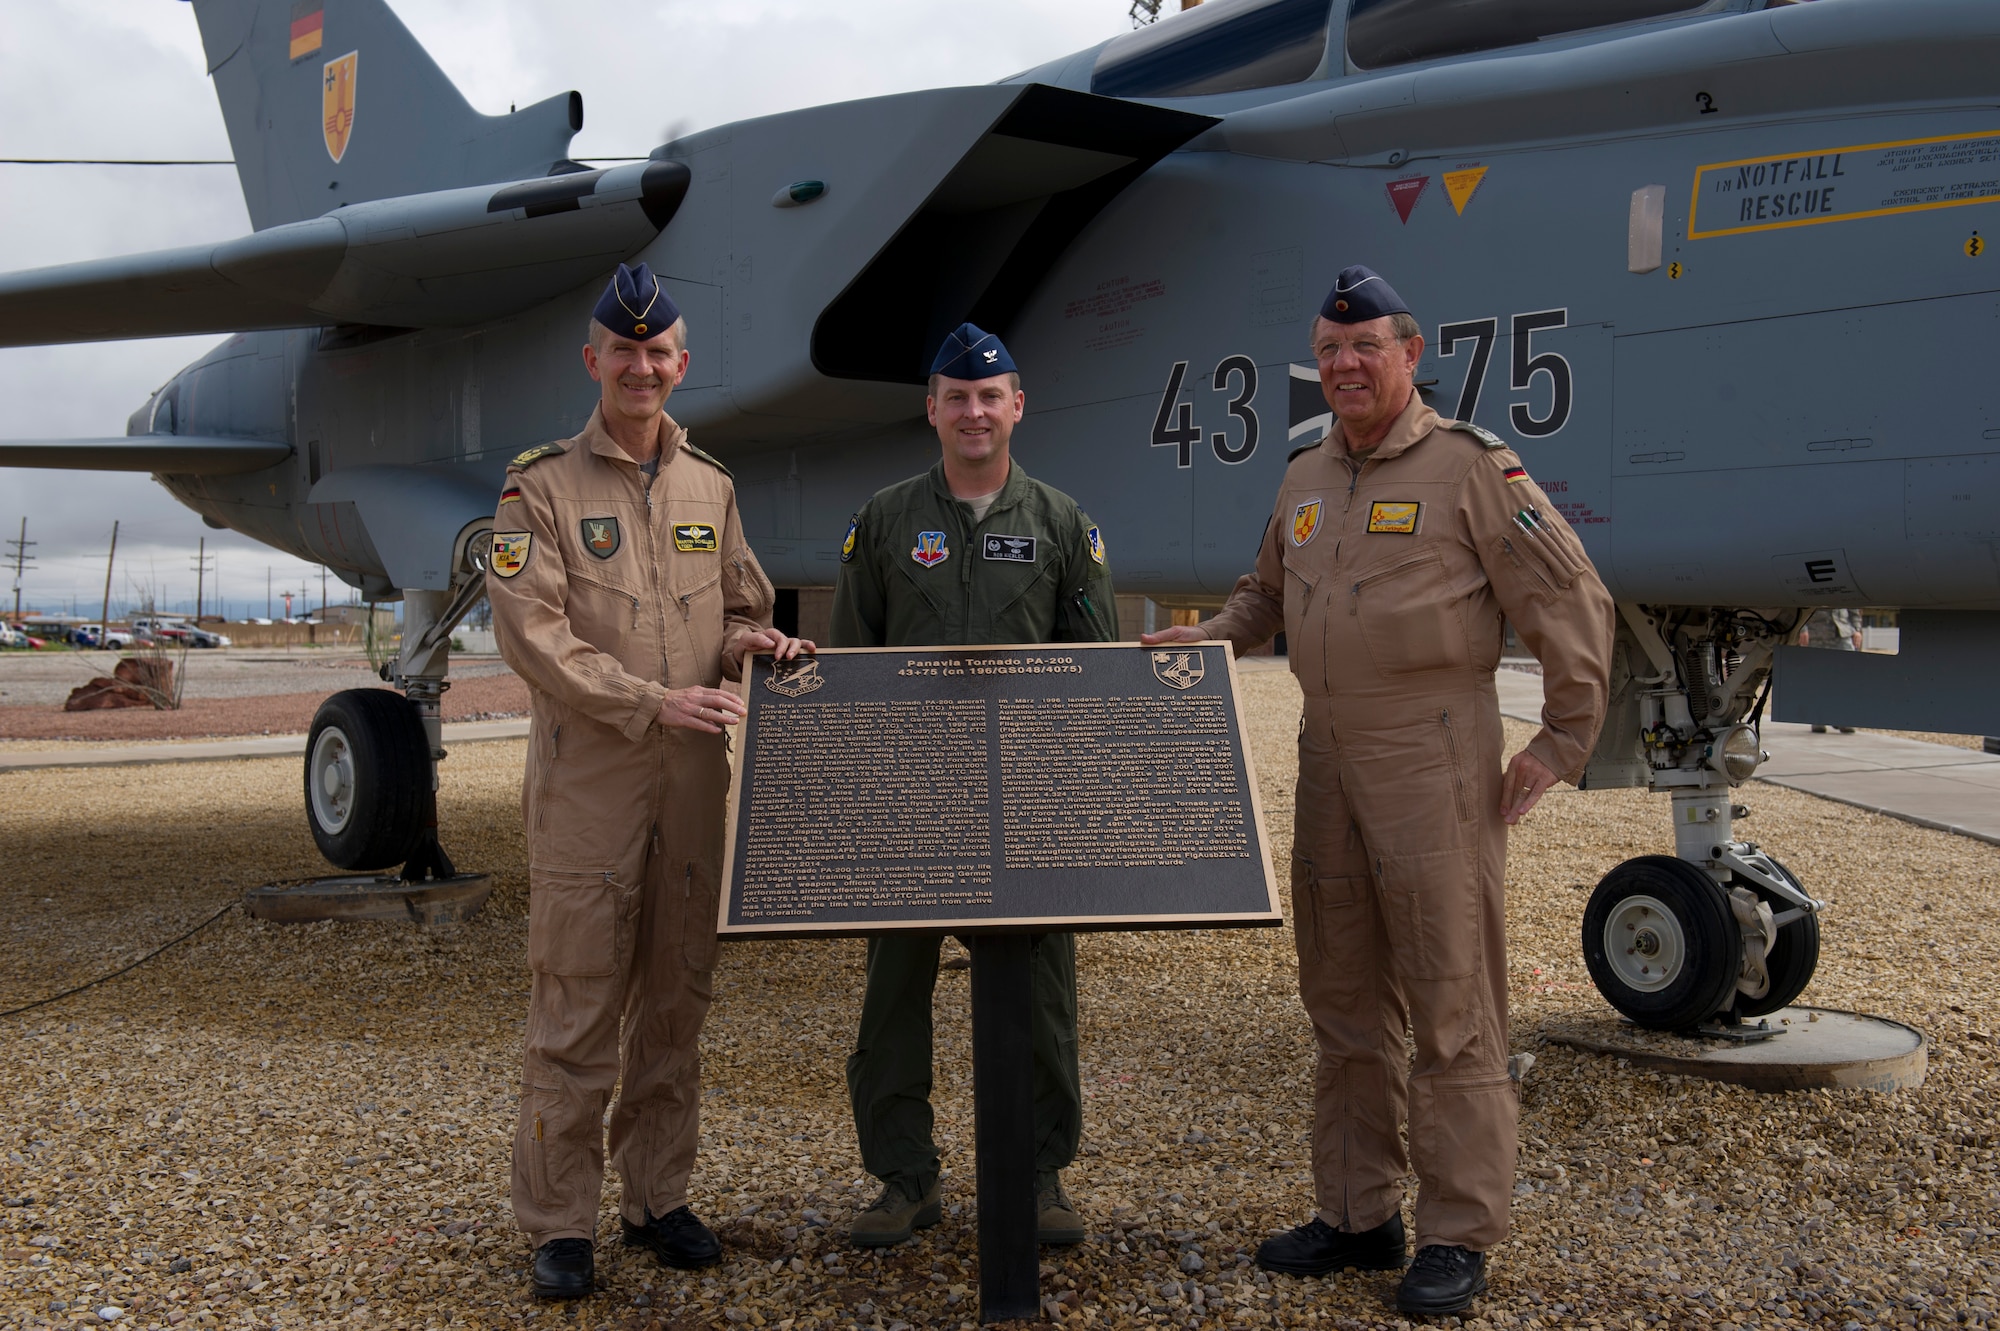 Lieutenant Gen. Martin Schellis, German Operational Forces Command commander, Col. Robert Kiebler, 49th Wing commander, and Col. Heinz Ferkinghoff, German Air Force Flying Training Center commander unveil the Tornado 43+75 plaque at Holloman Air Force Base’s Heritage Park Sep. 19. History was made Sep. 19, when a German Air Force static aircraft was unveiled in Heritage Park by Schellis and Kiebler. The GAF Training Center and the Tornados are a significant part of military aviation operations in and around Holloman Air Force Base and White Sands Missile Range. (U.S. photo by Staff Sgt. E’Lysia Wray/ Released)